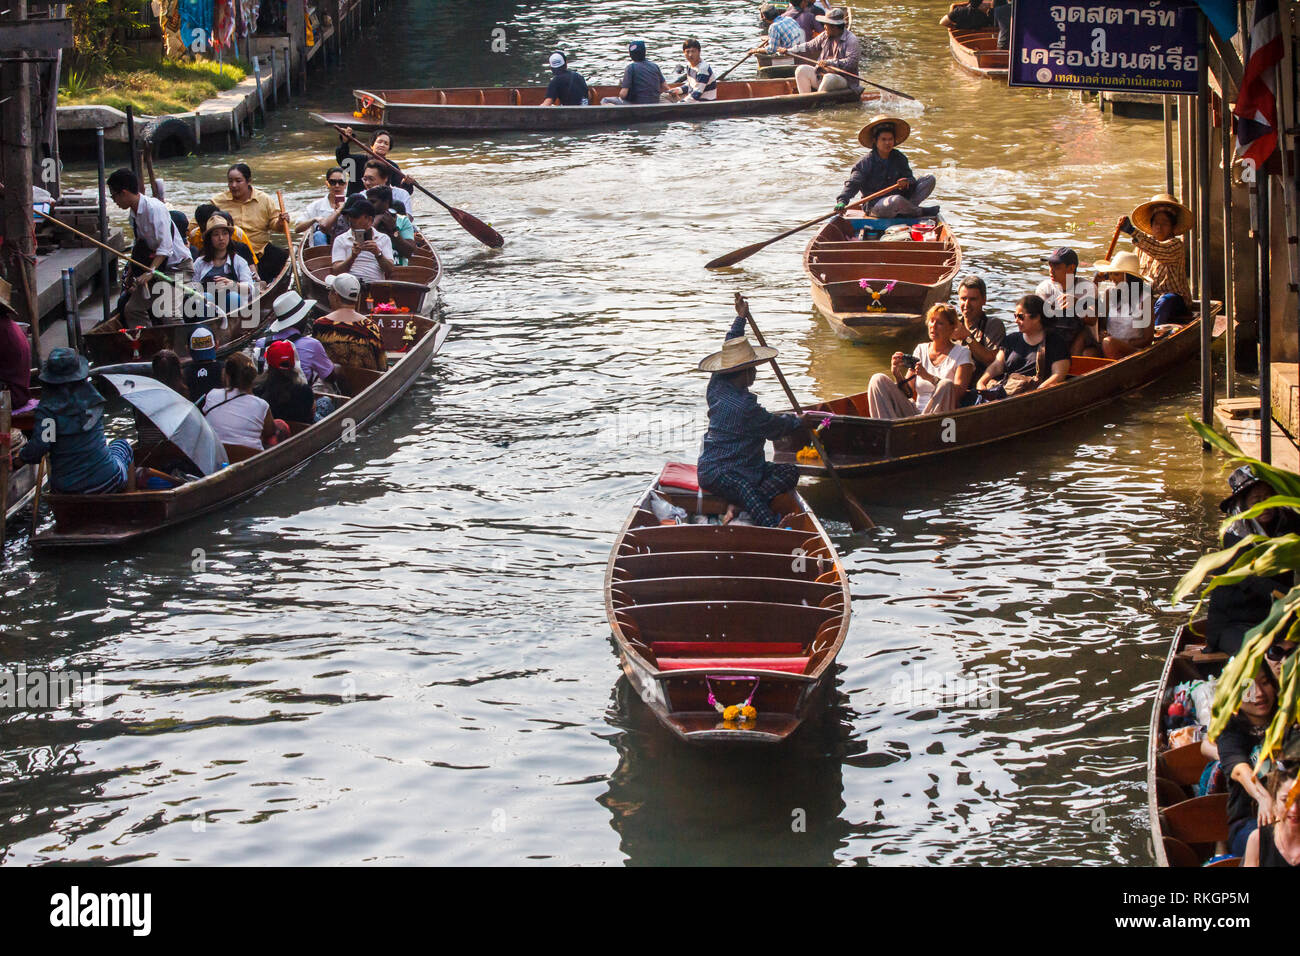 Damnoen Saduak, Thailand - 4th March 2017: Tourists in boats.  The floating market is a popular tourist atrraction Stock Photo